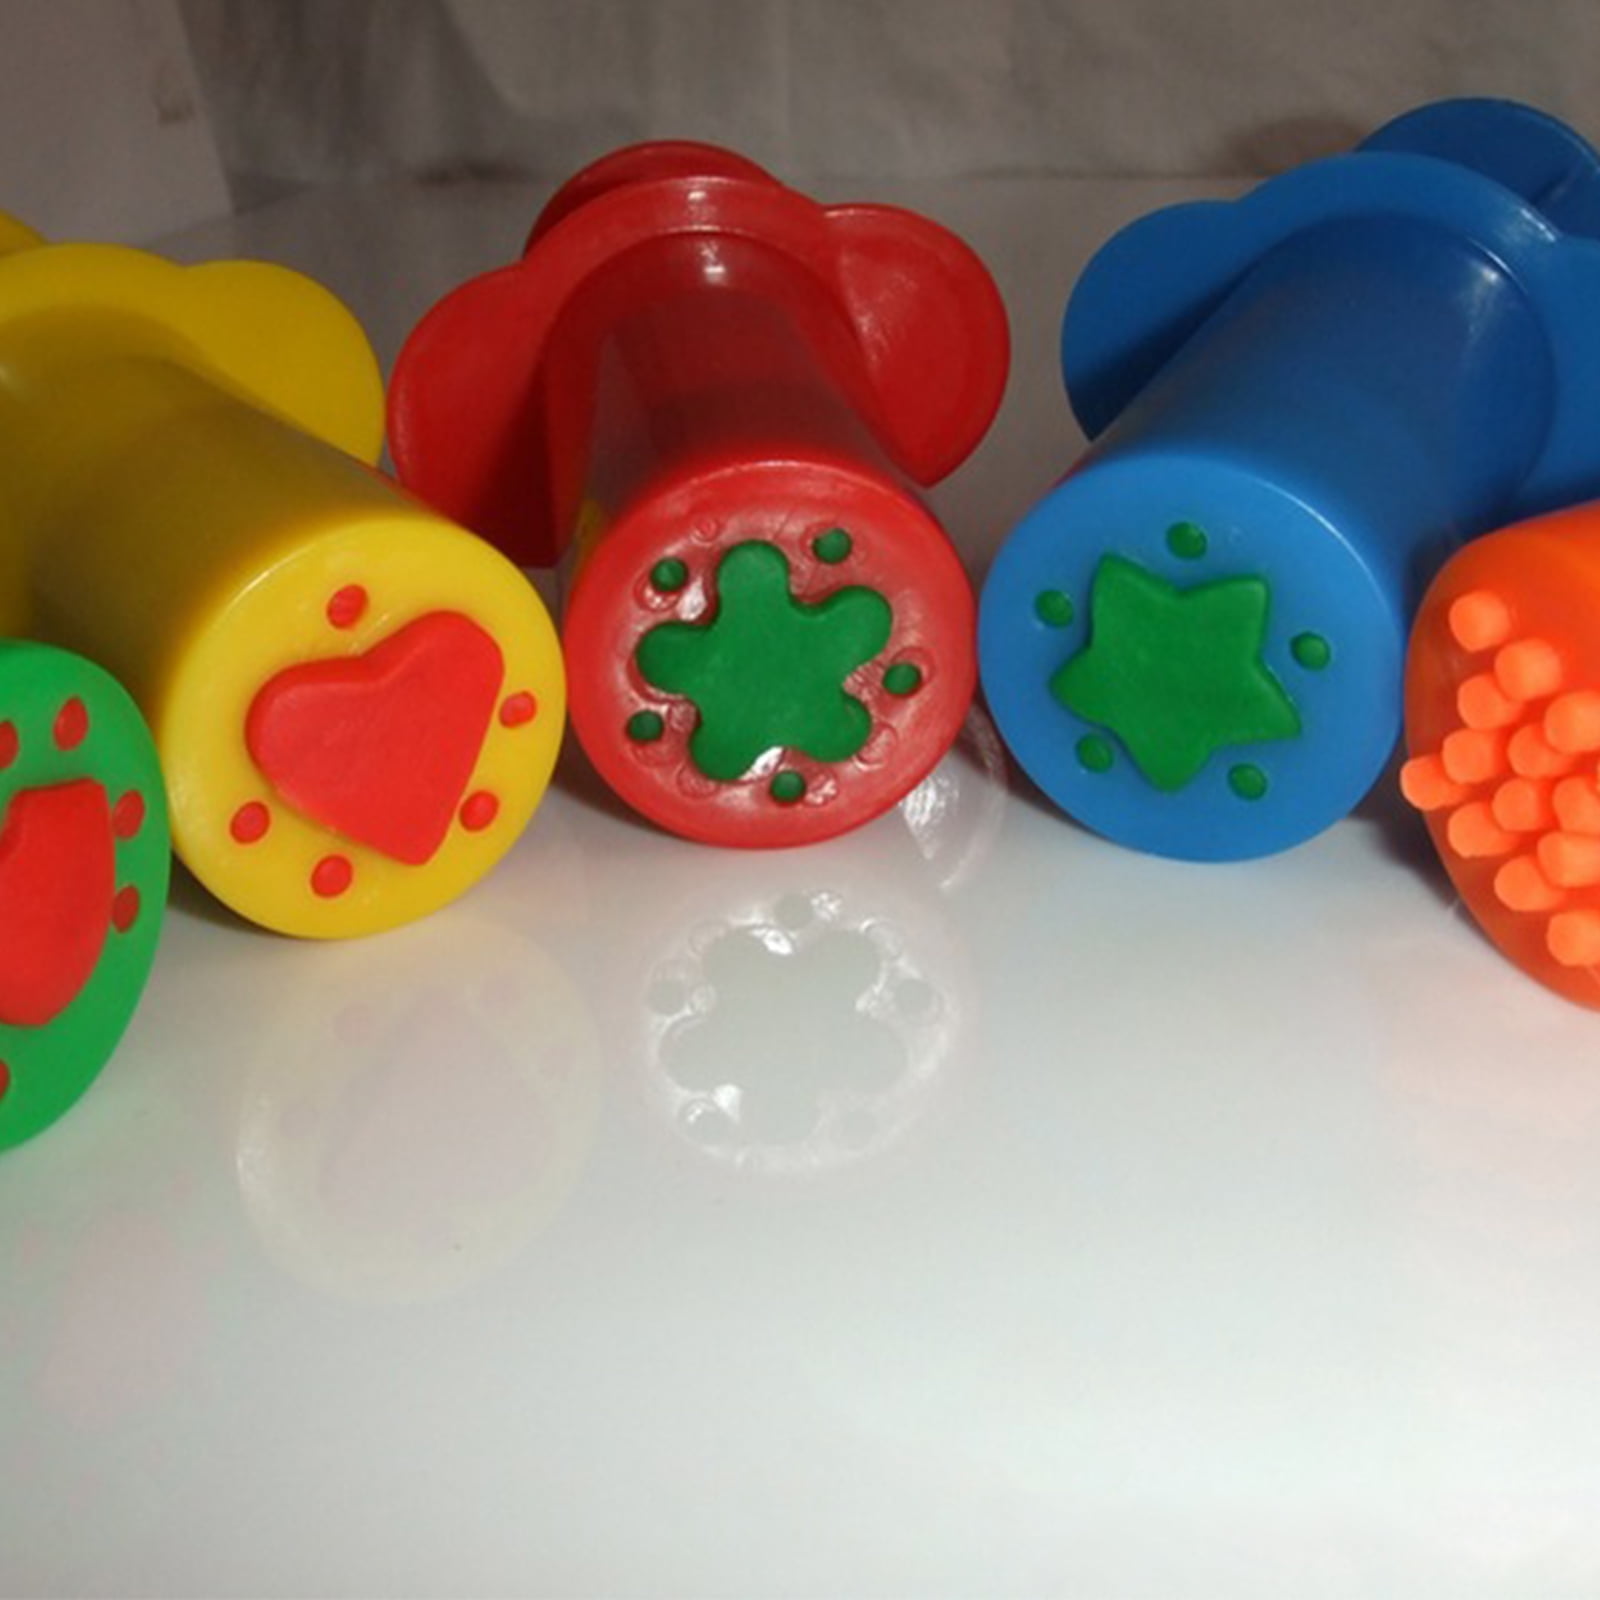 Details about   MARTY'S SLIME SV13572 GOO PUTTY SLIMEY FUN KIDS PLAY MOULD SHAPE PULL TWIST 